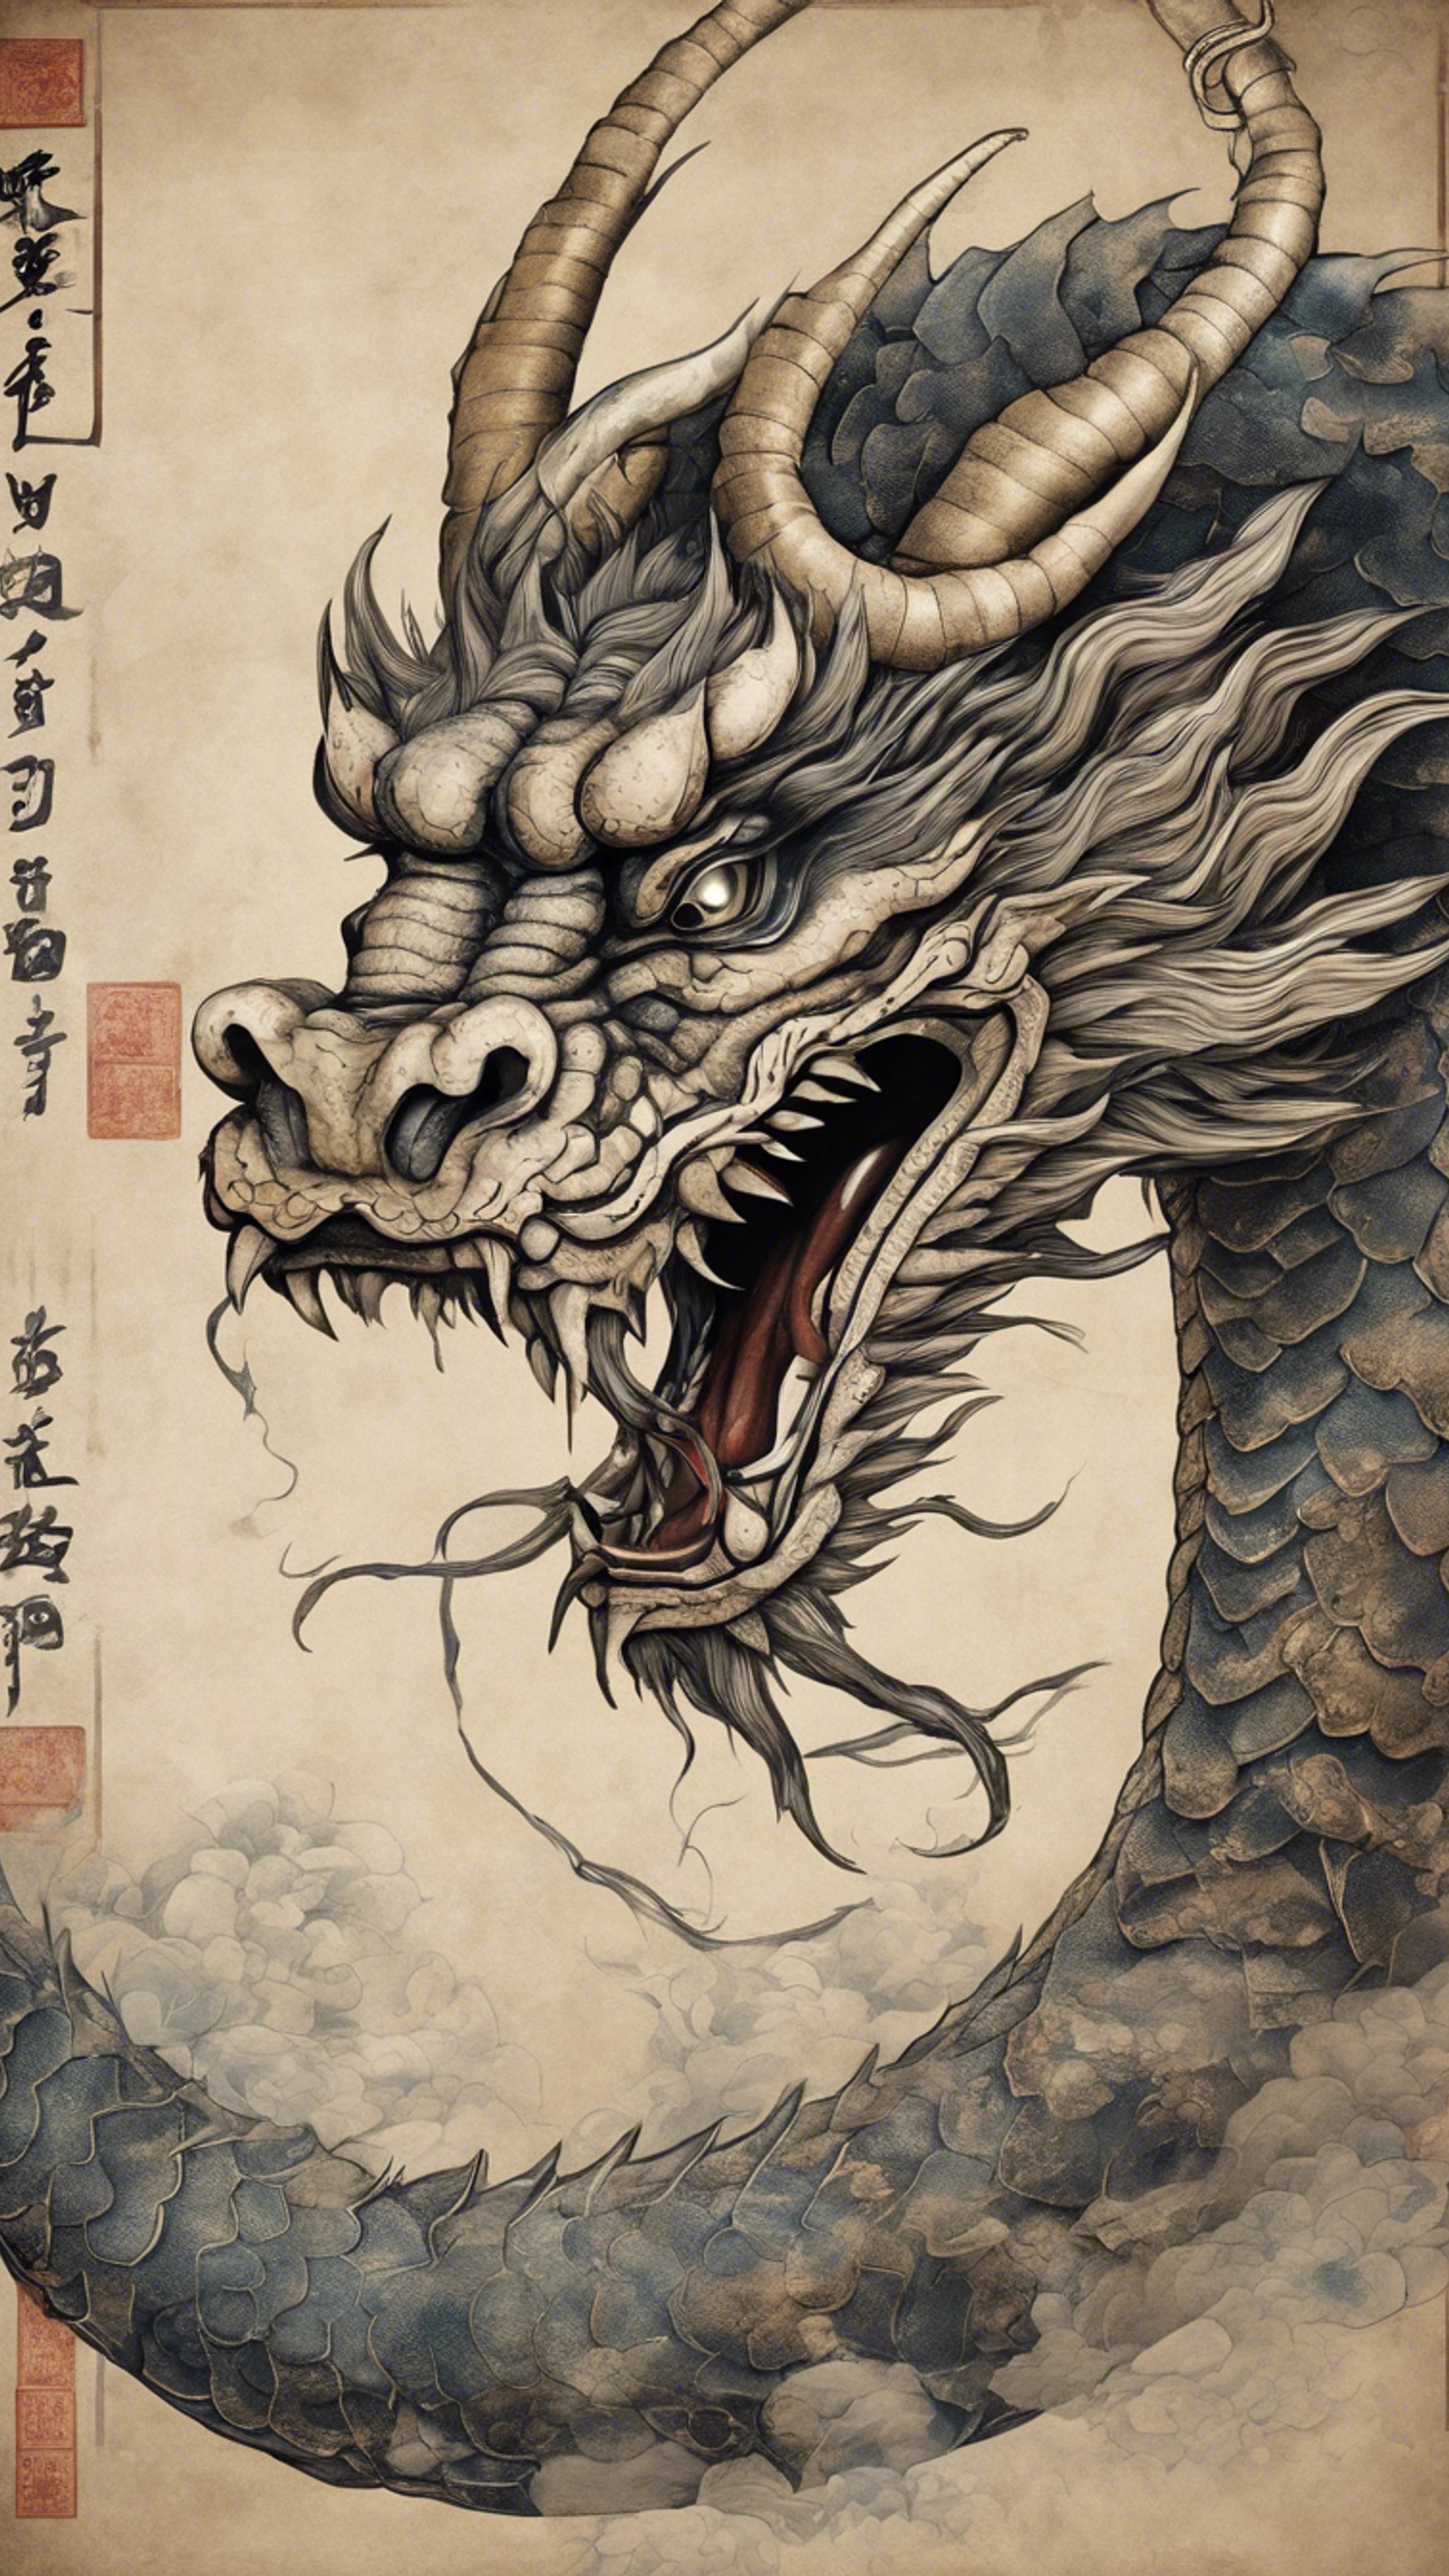 A majestic Japanese dragon illustrated in an ancient scroll.壁紙[ee61e4c394914154b9e3]